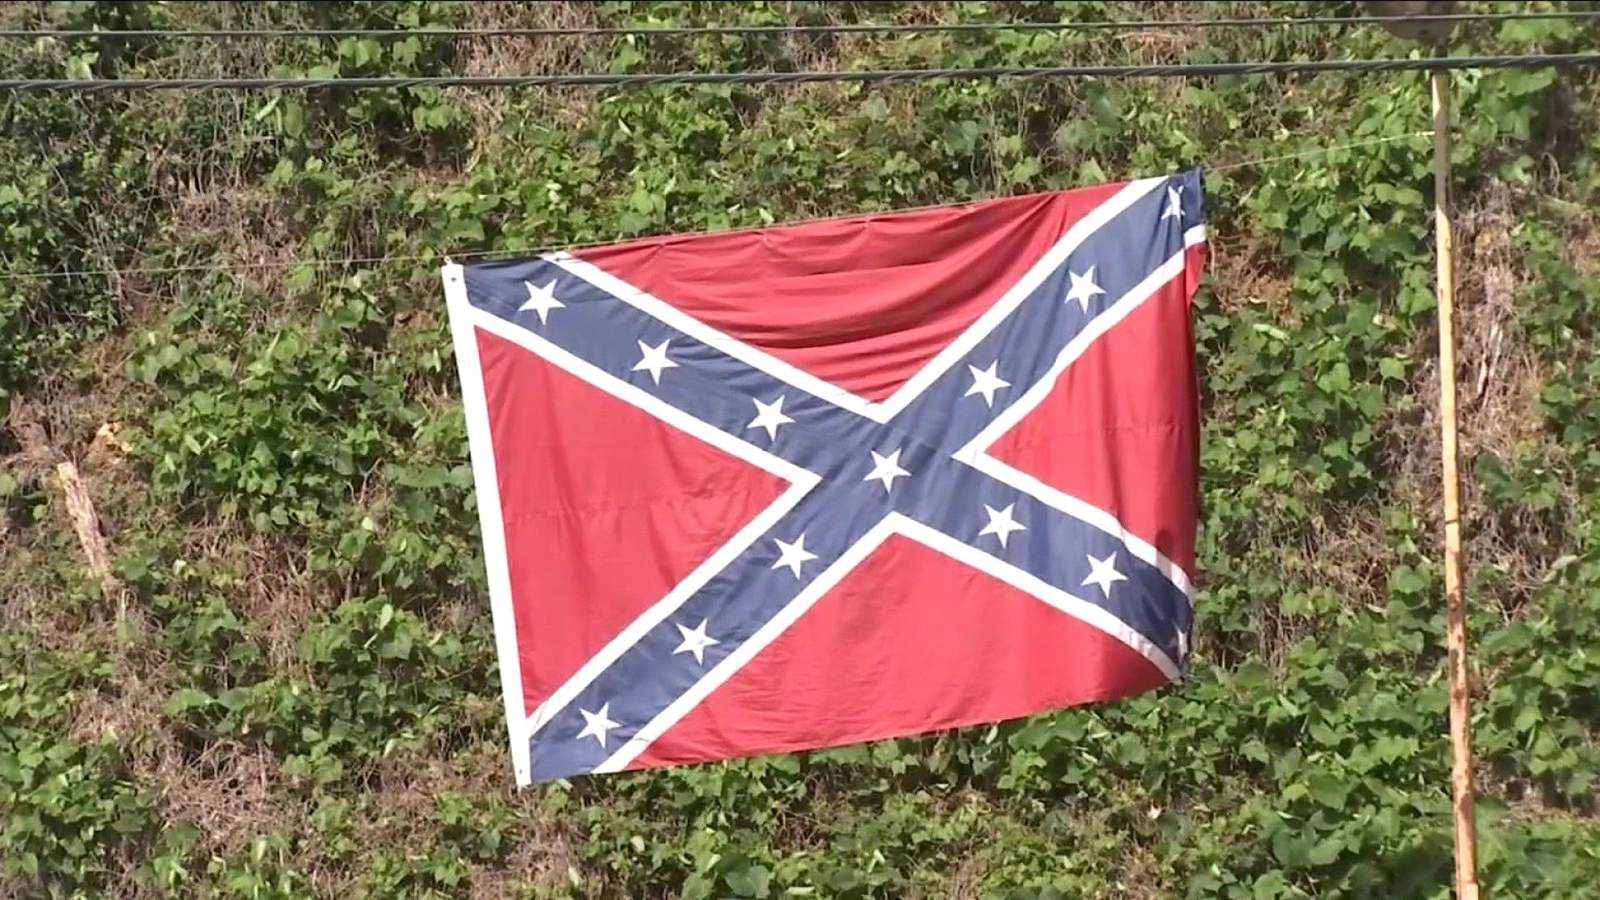 ‘Step in the right direction’: Bedford schools officially ban Confederate imagery